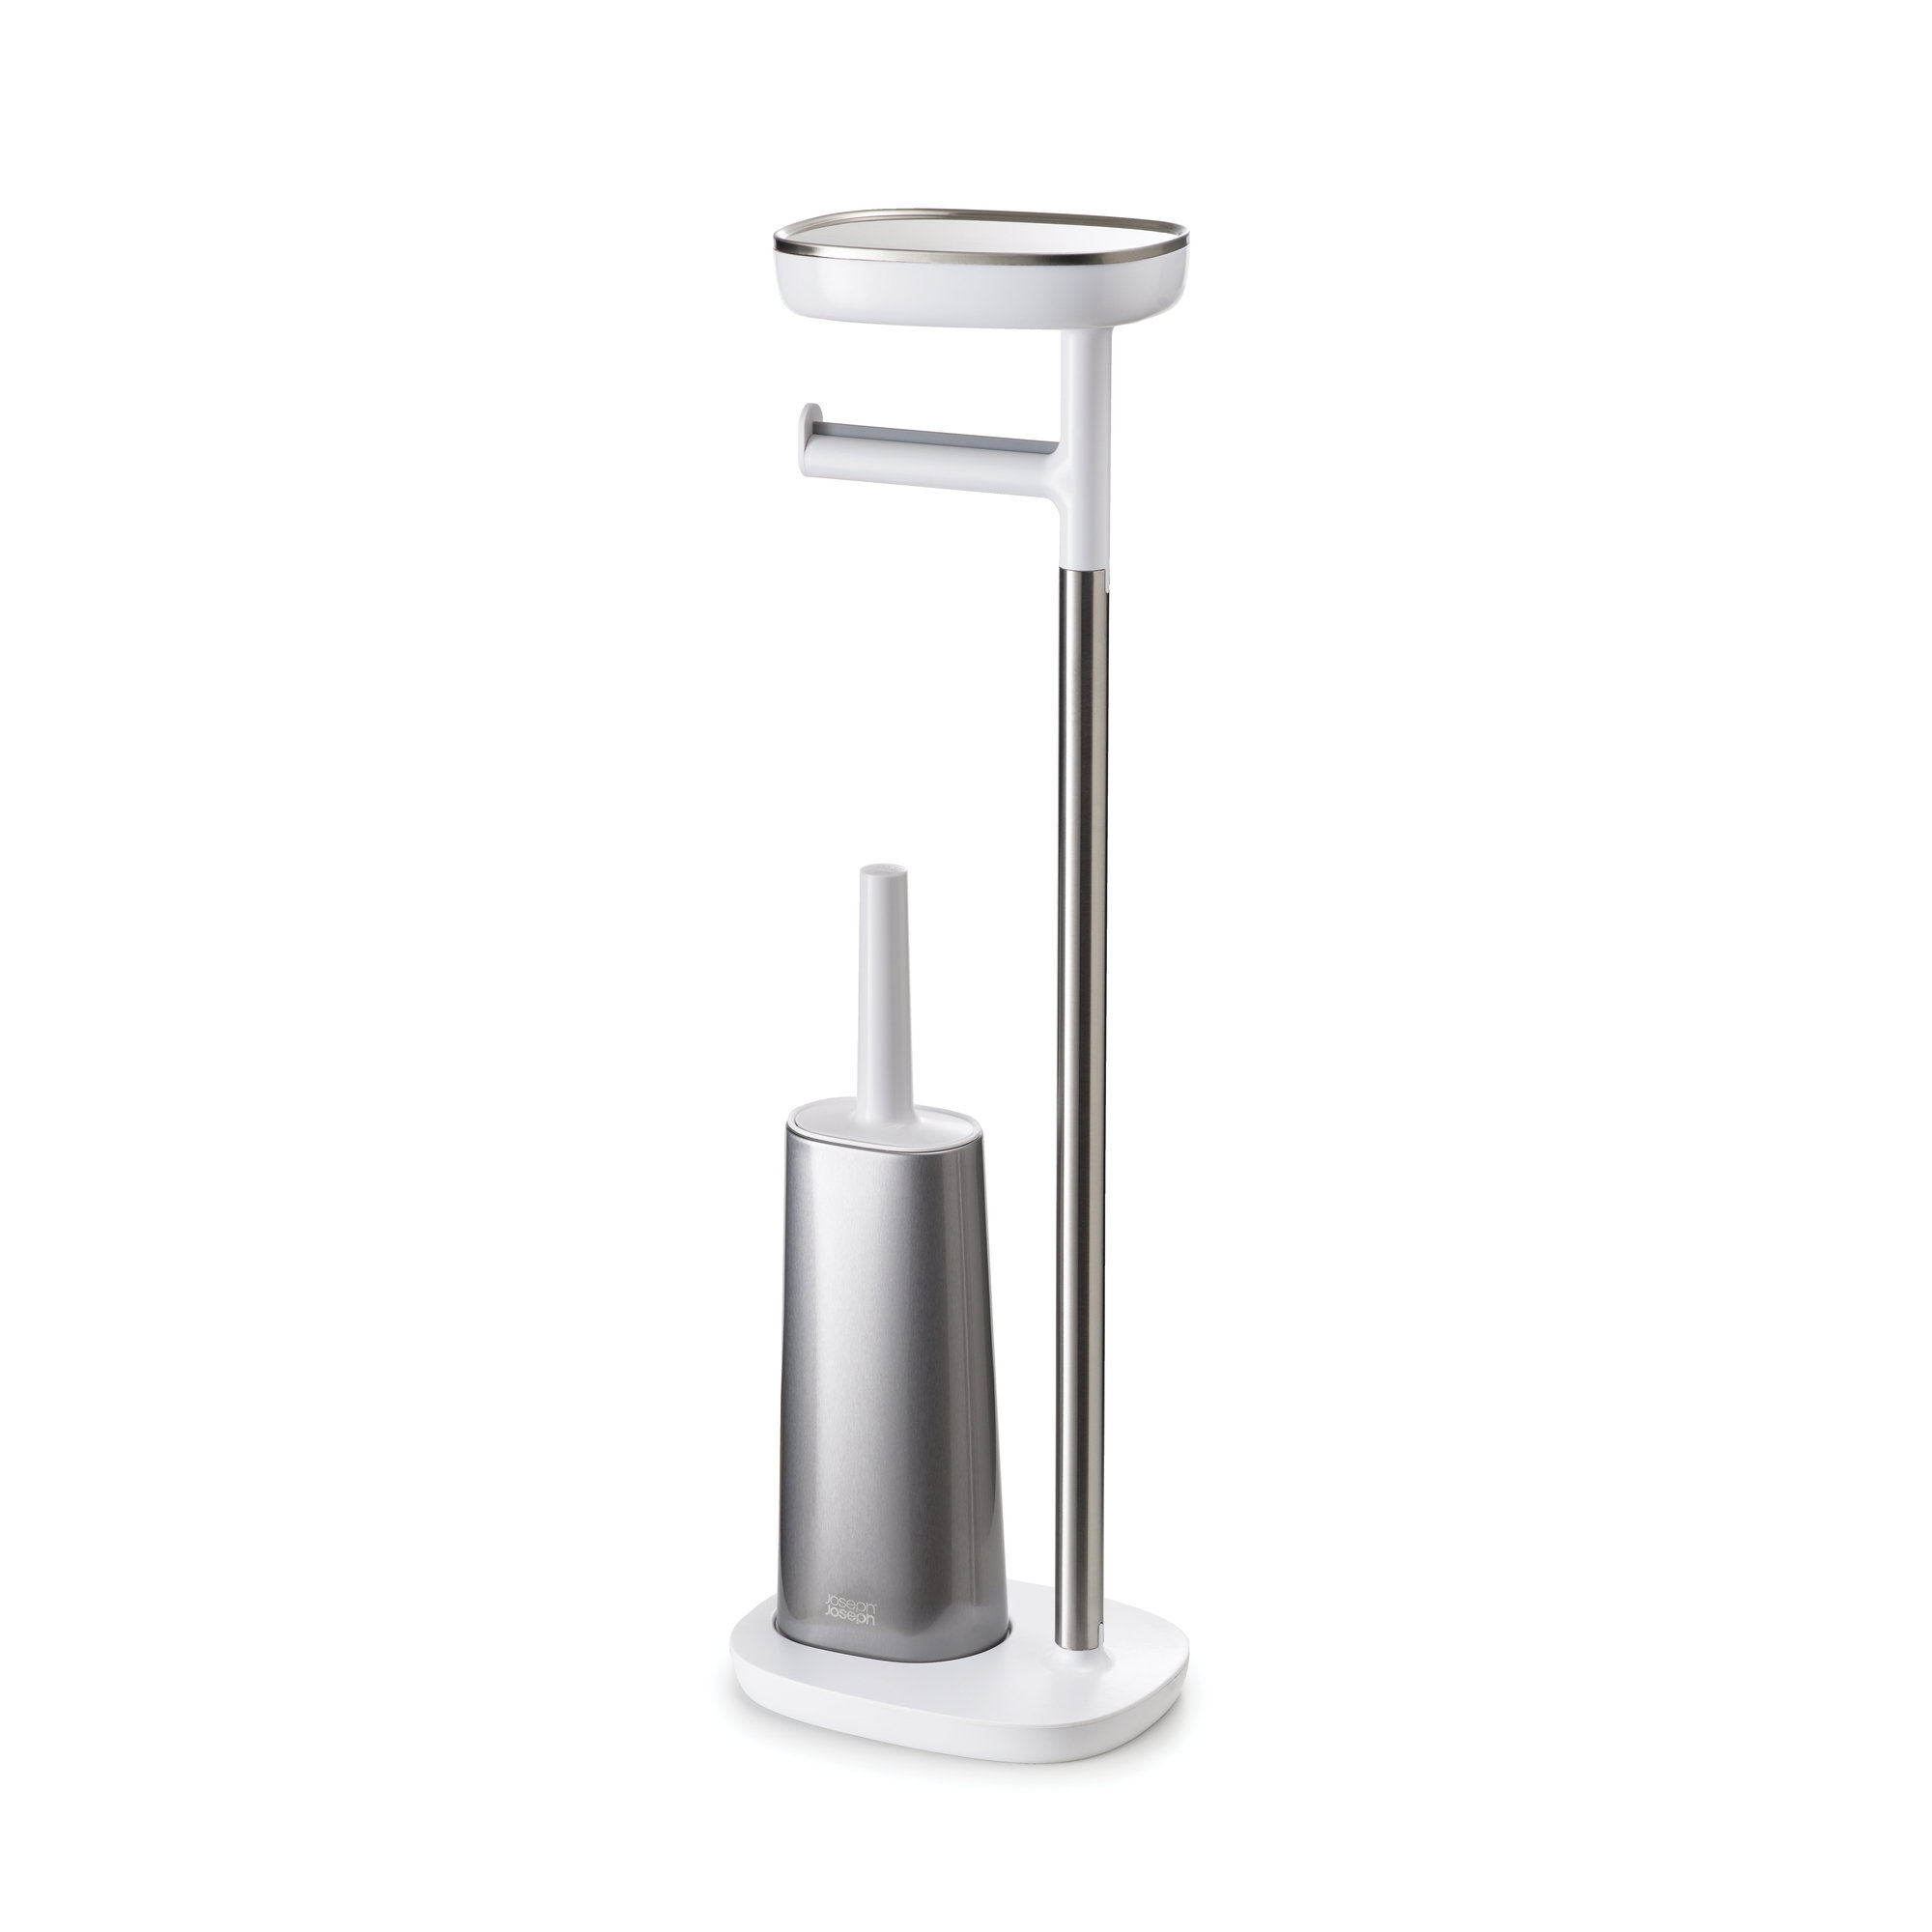 EasyStore™ Stainless-steel Large Toothbrush Holder